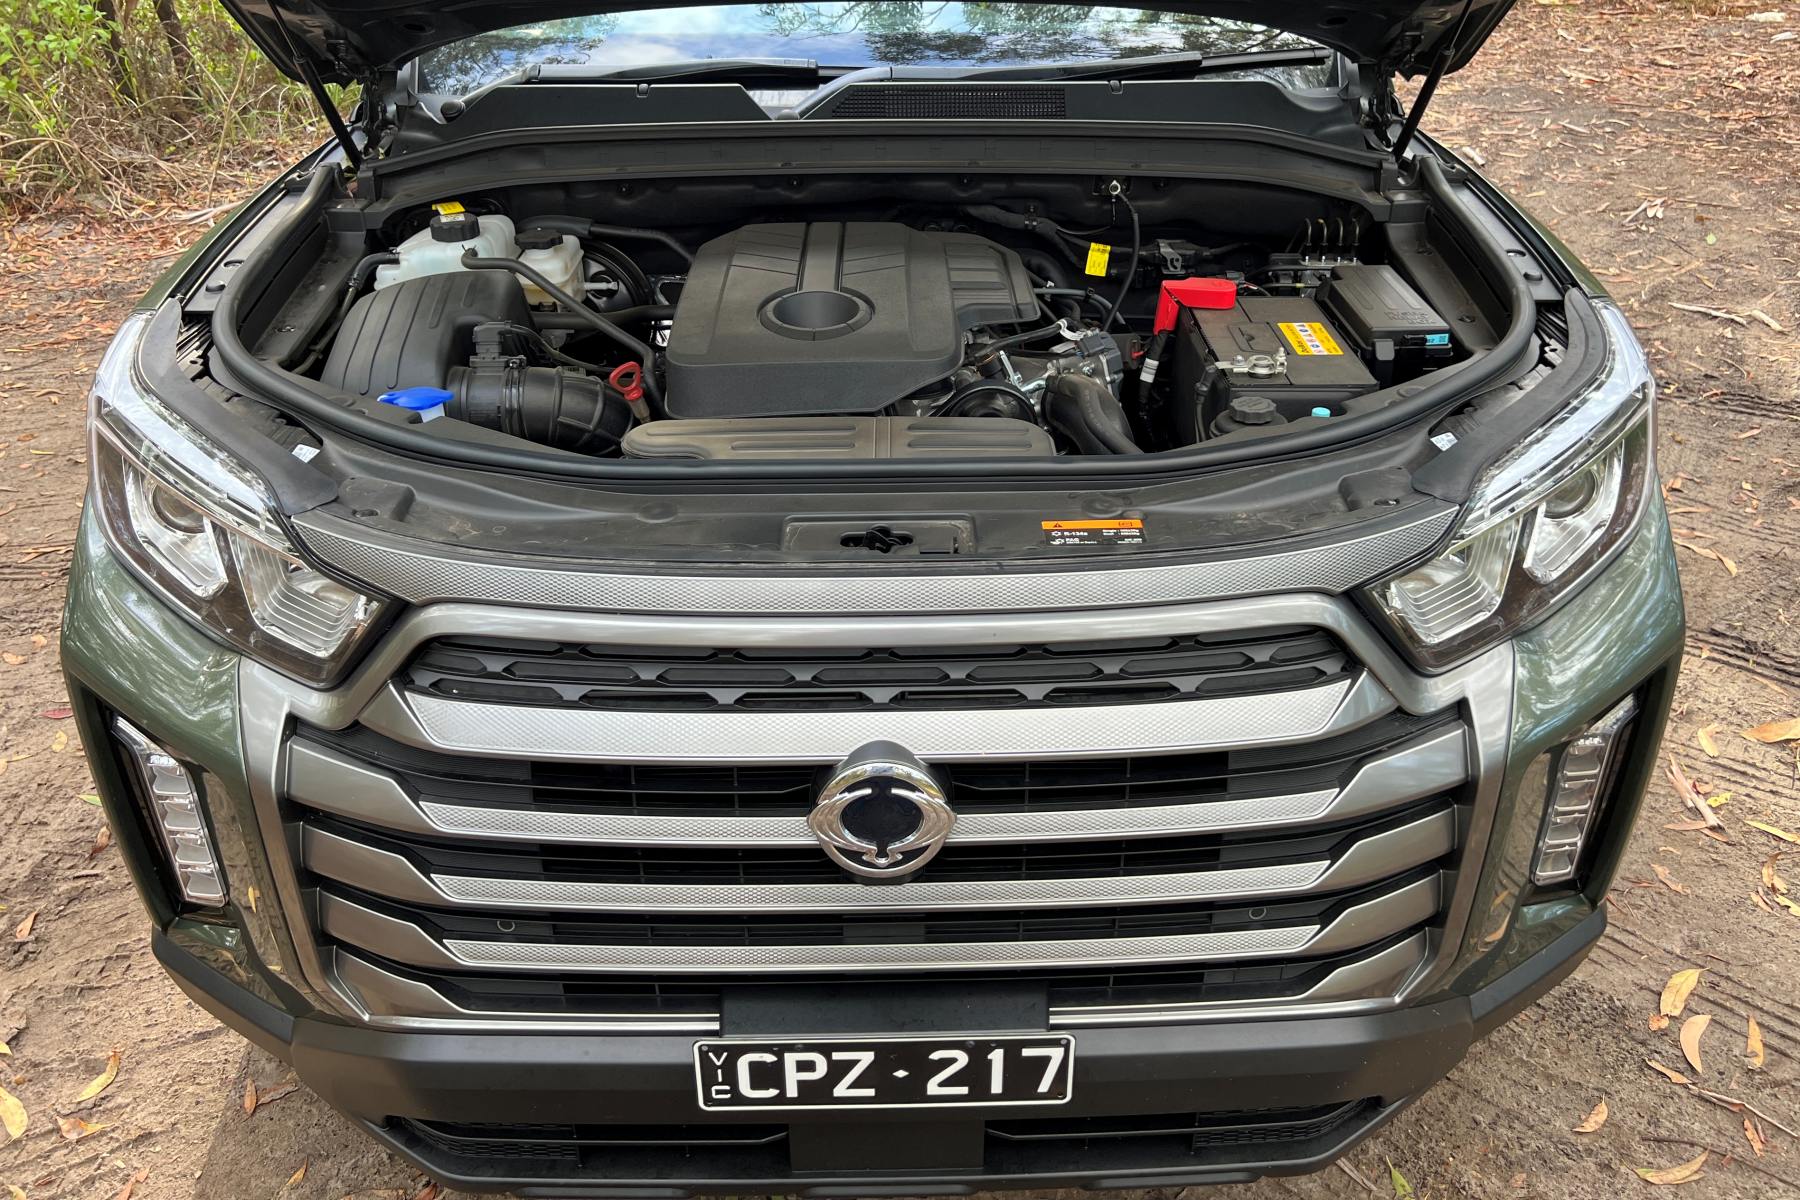 SsangYong Musso Adventure XLV Ute engine 1